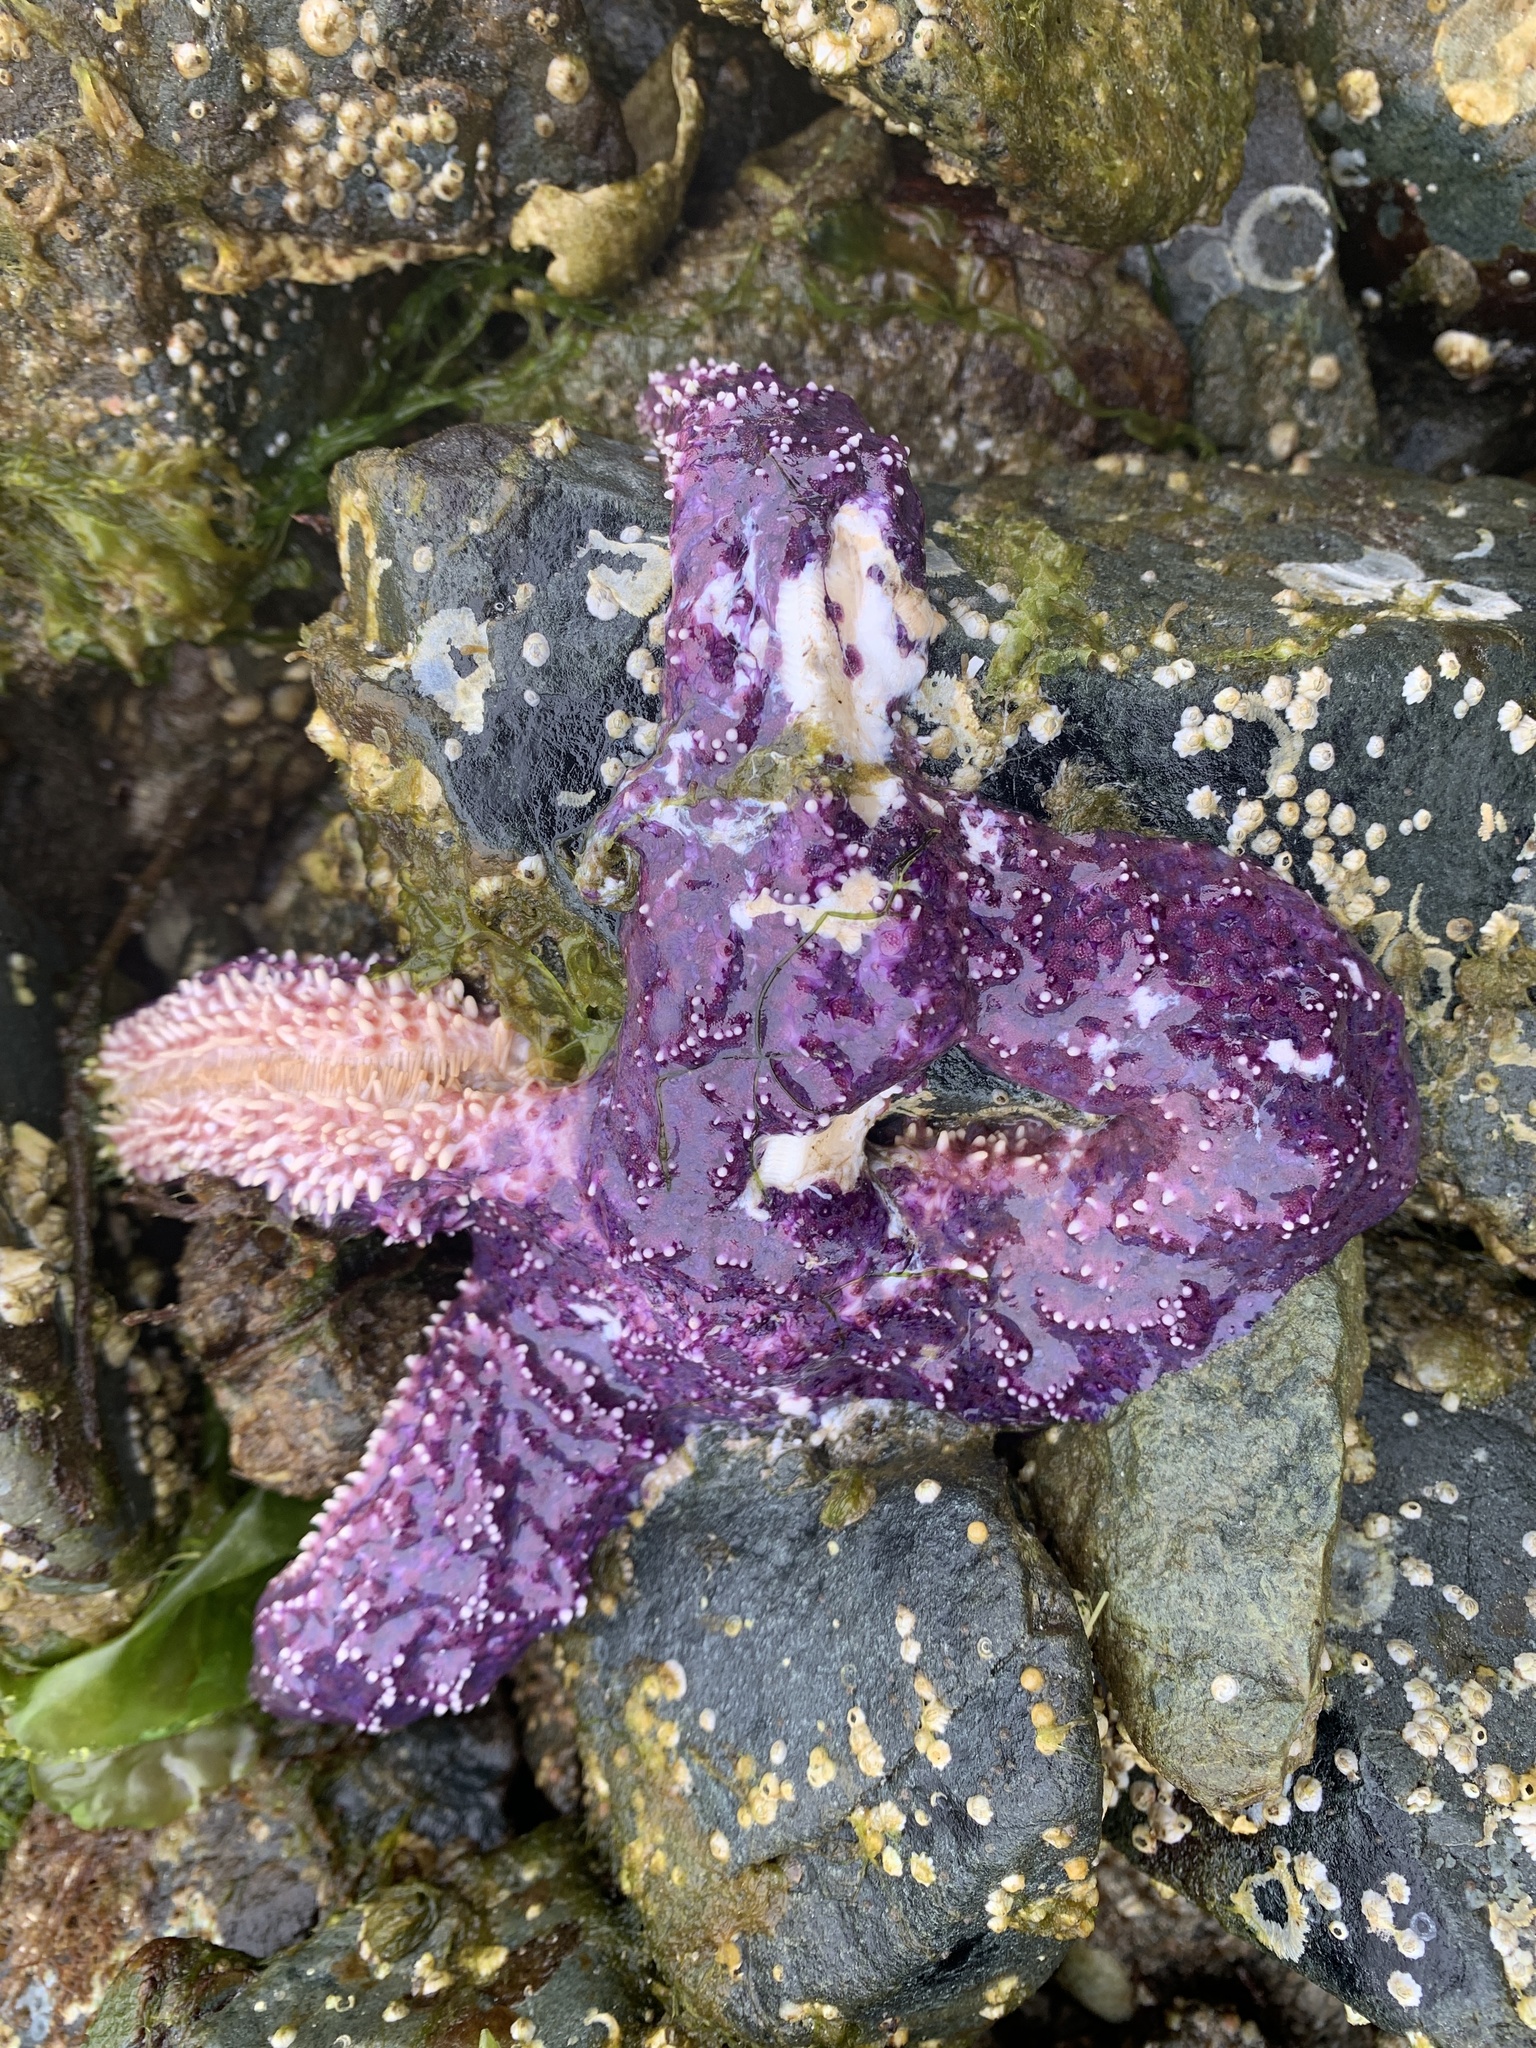 A purple starfish appears to be melting in shallow water.